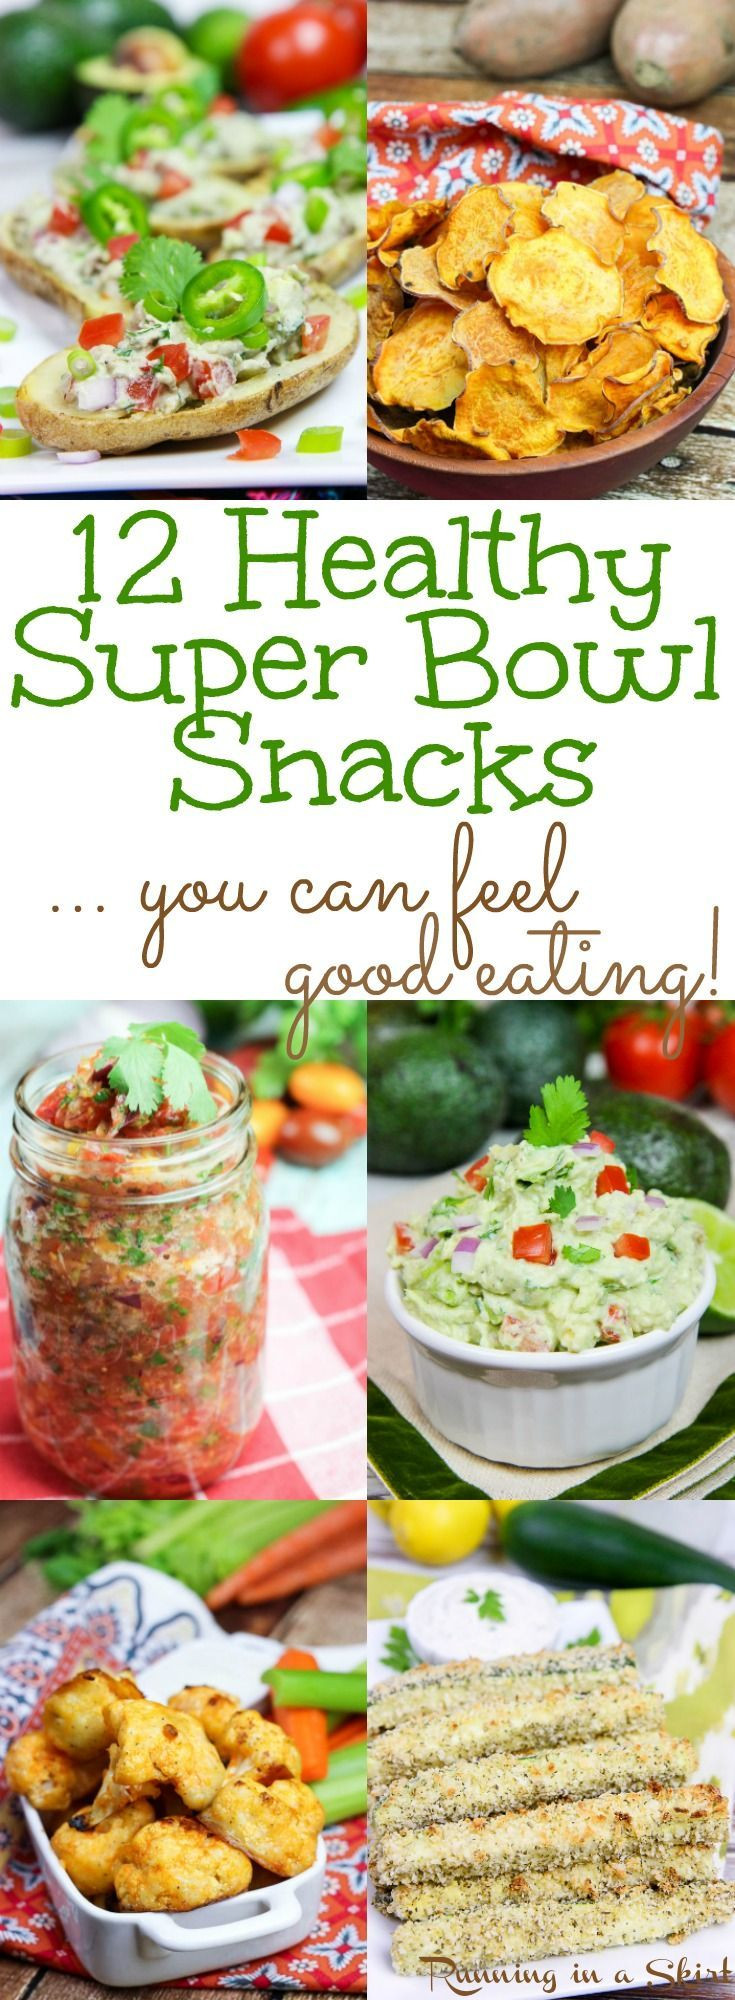 Vegetarian Game Day Recipes
 12 Healthy Super Bowl Snacks These are game day recipes